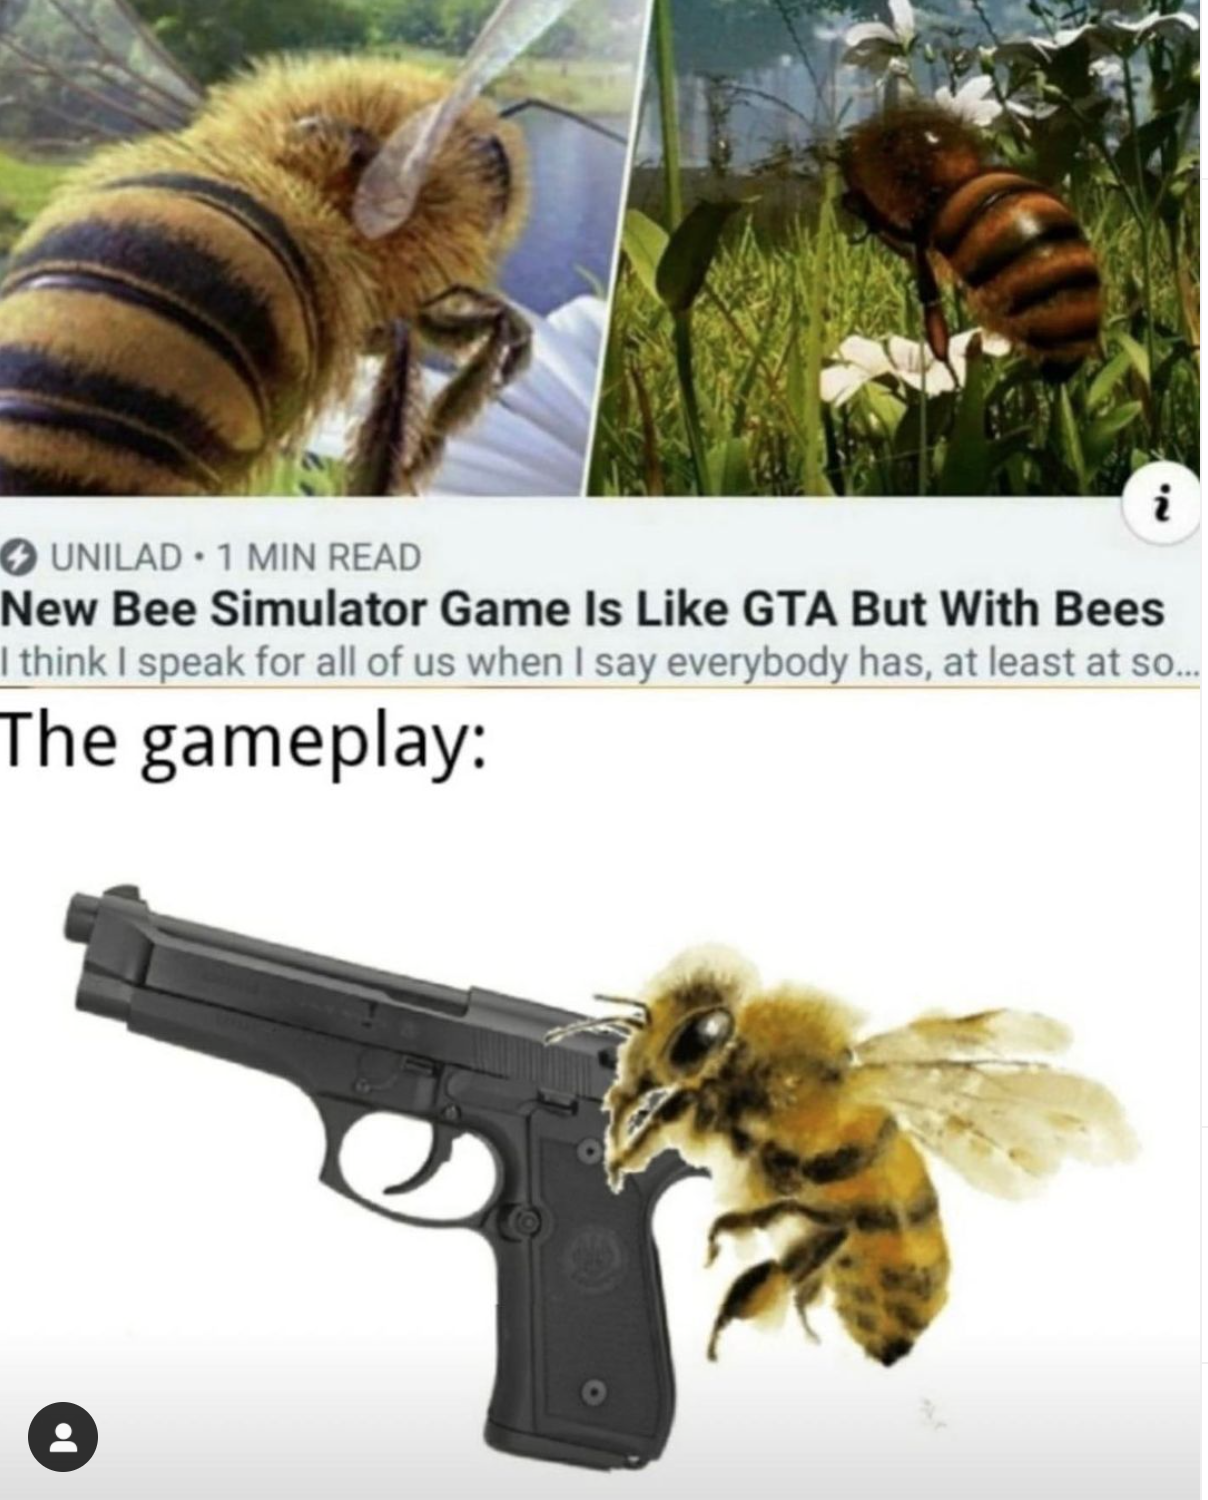 gaming memes - bee movie star wars meme - Unilad 1 Min Read New Bee Simulator Game Is Gta But With Bees I think I speak for all of us when I say everybody has, at least at so... The gameplay